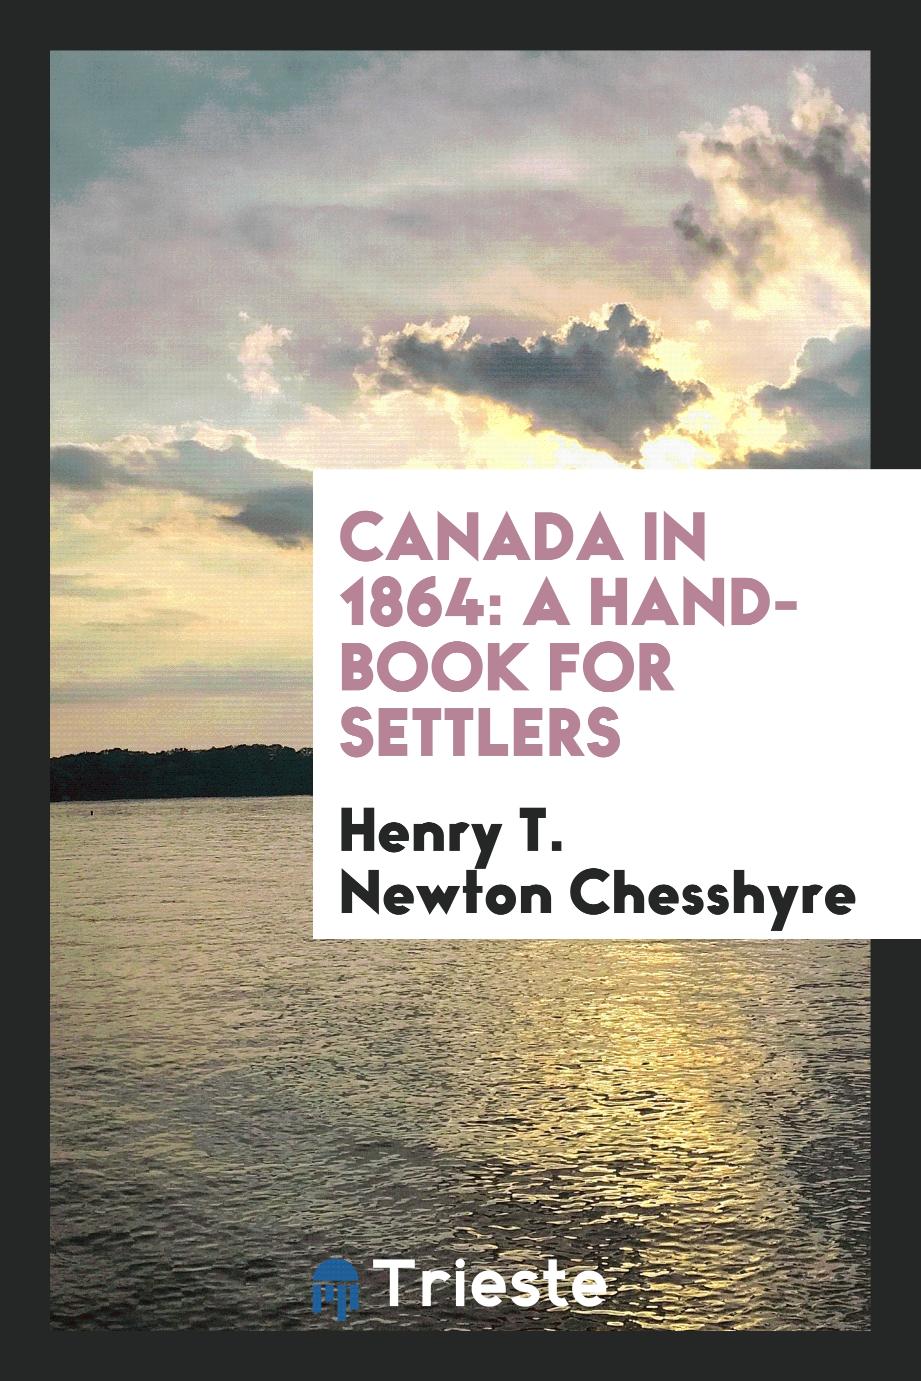 Canada in 1864: A Hand-Book for Settlers